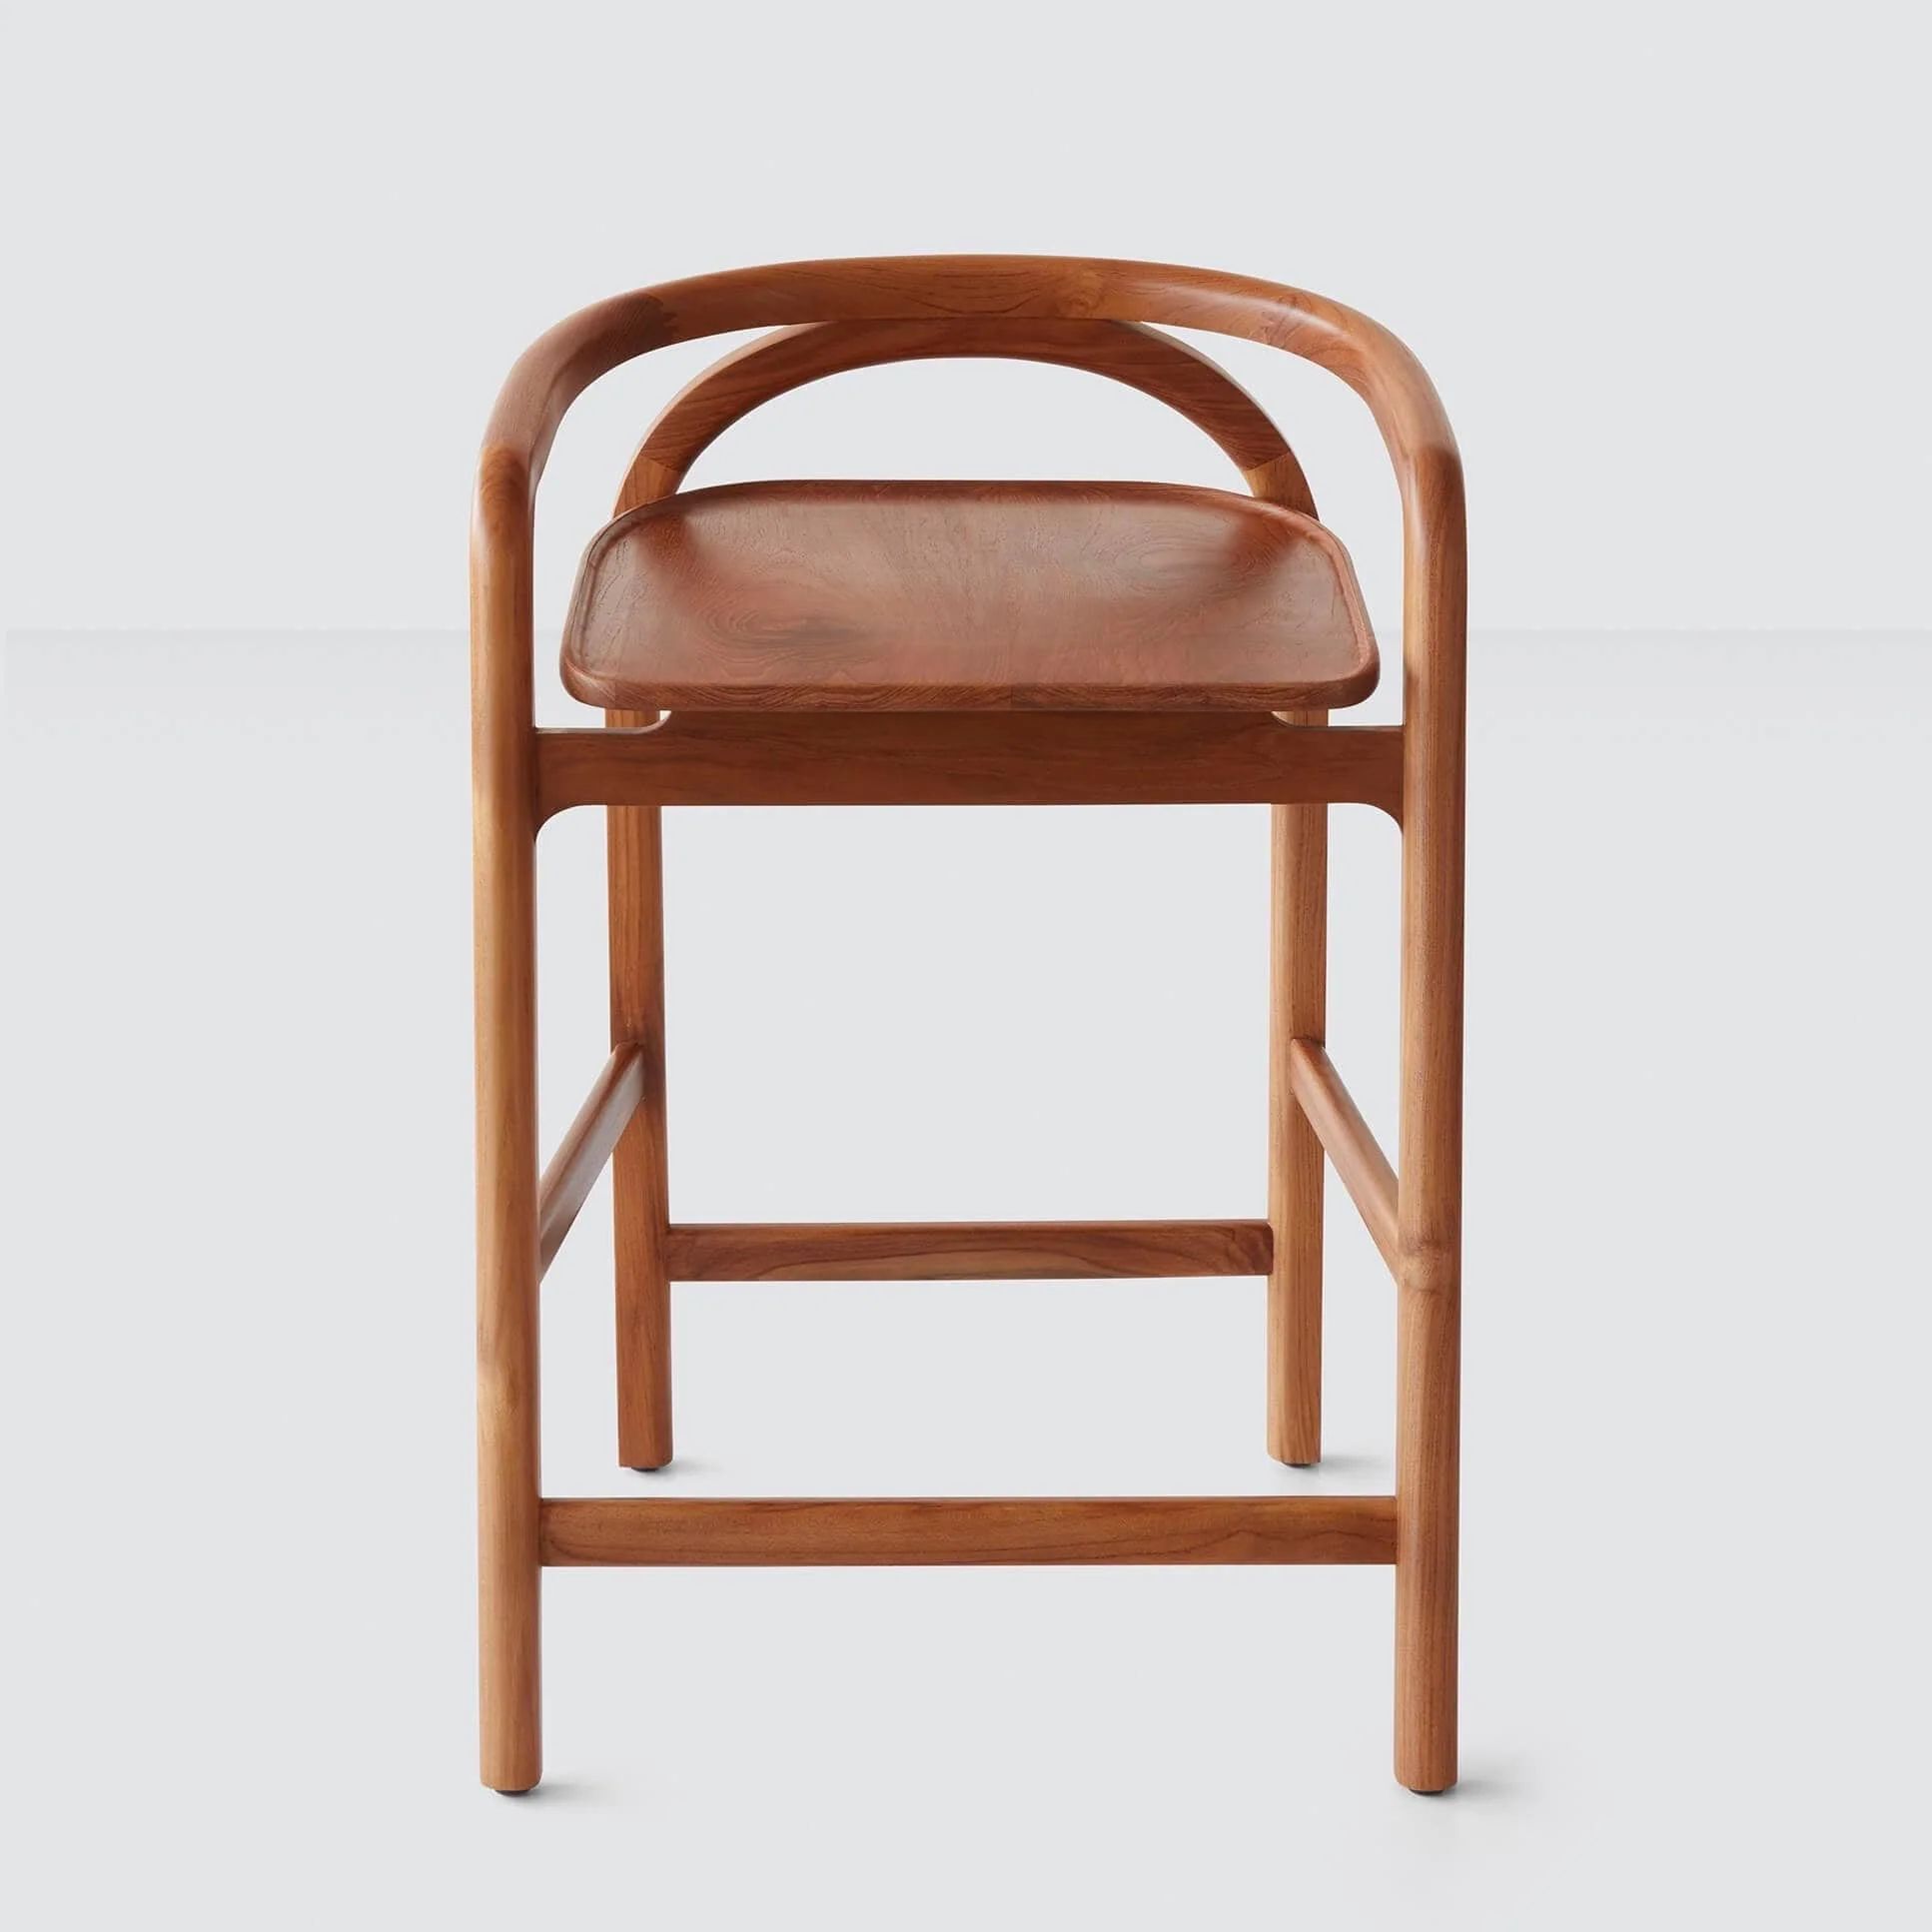 Solid Wood Counter Stool | Sustainably Sourced Teak Wood   – The Citizenry | The Citizenry